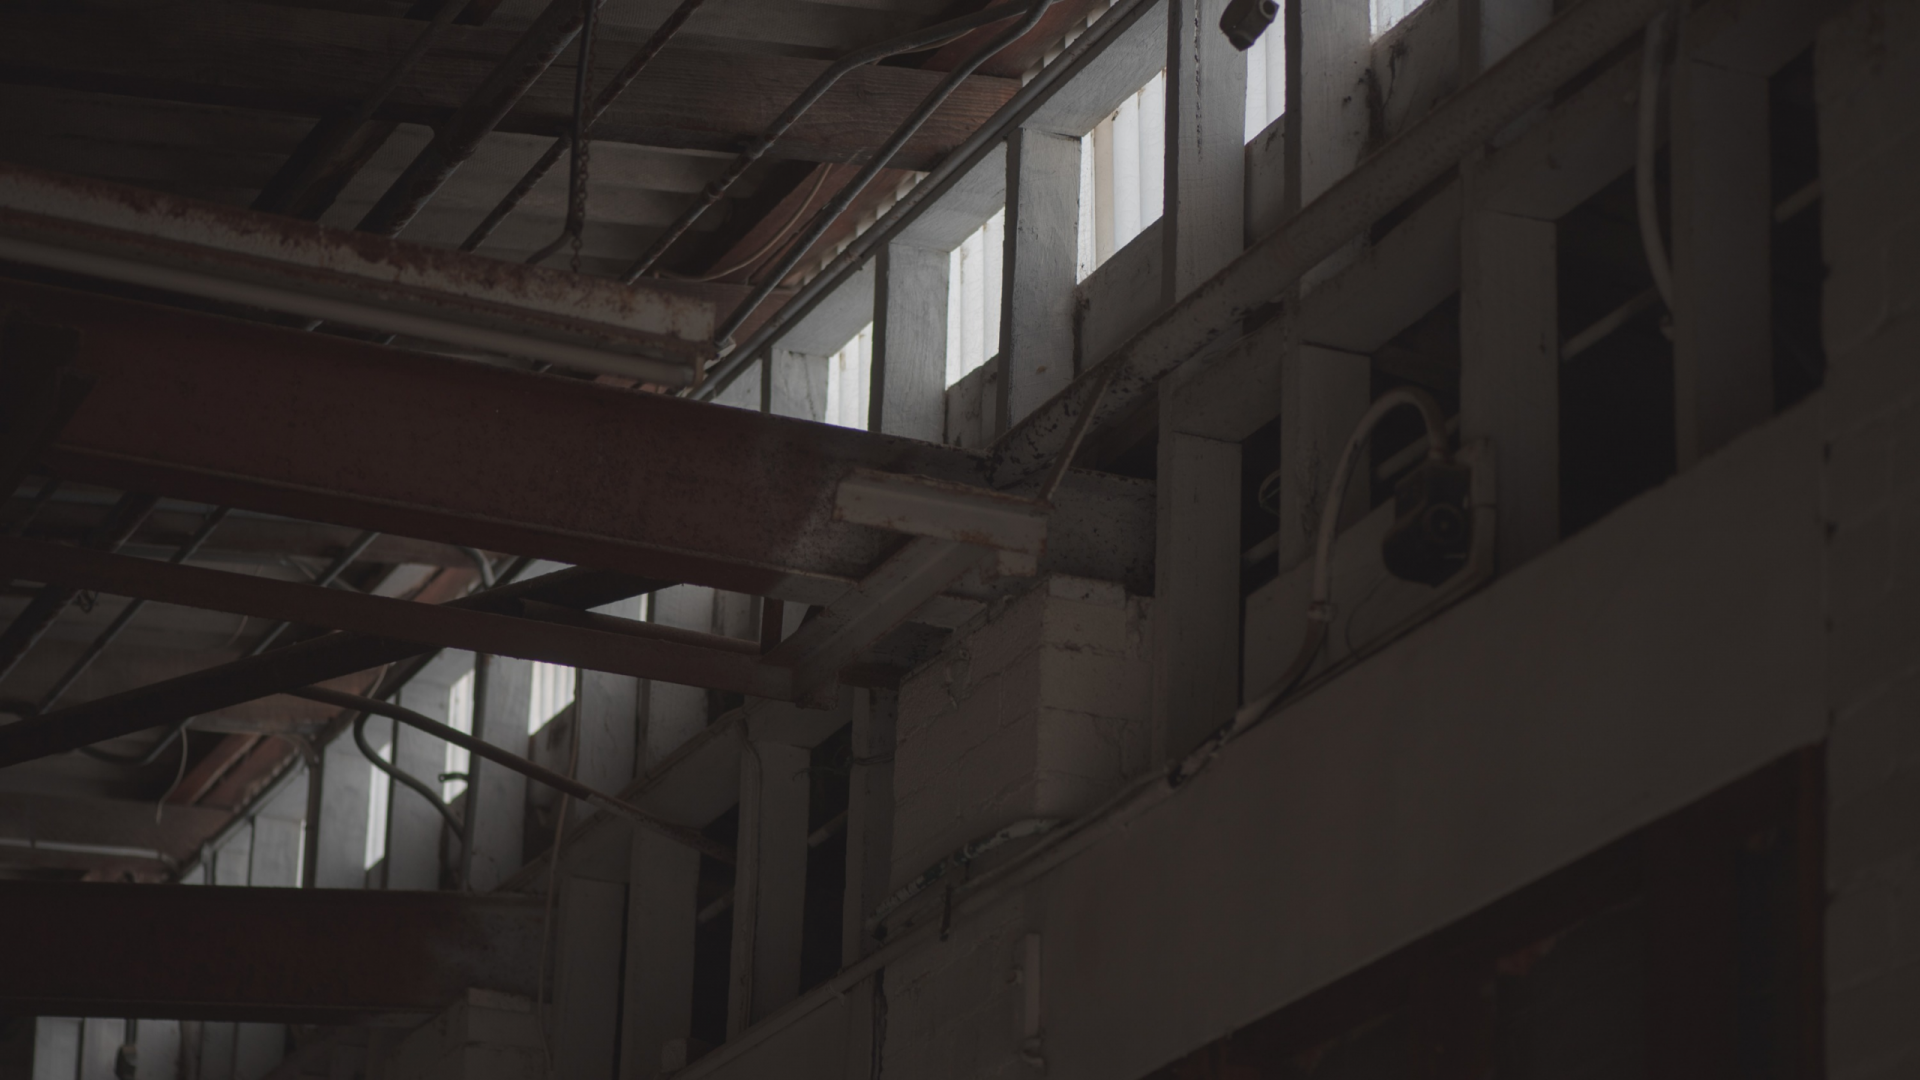 Inside of an industrial building. There is two long red beams and a row of dim windows